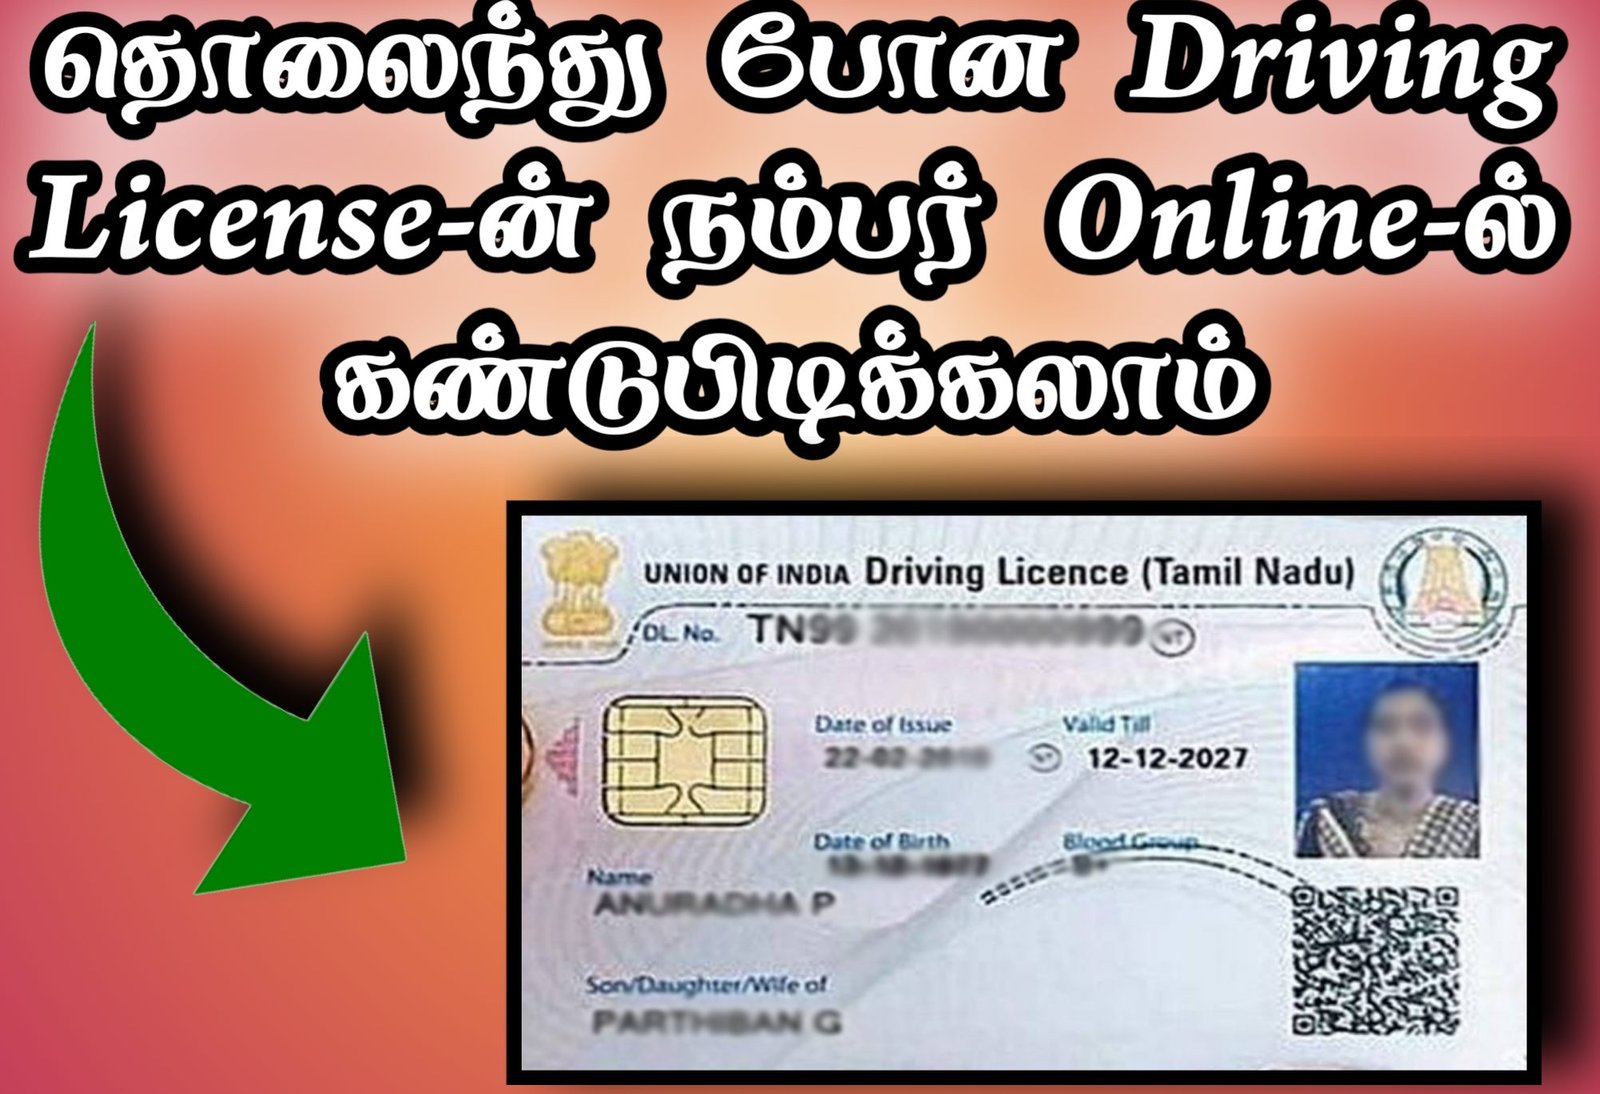 How To Find Missed Driving Licence Number Online